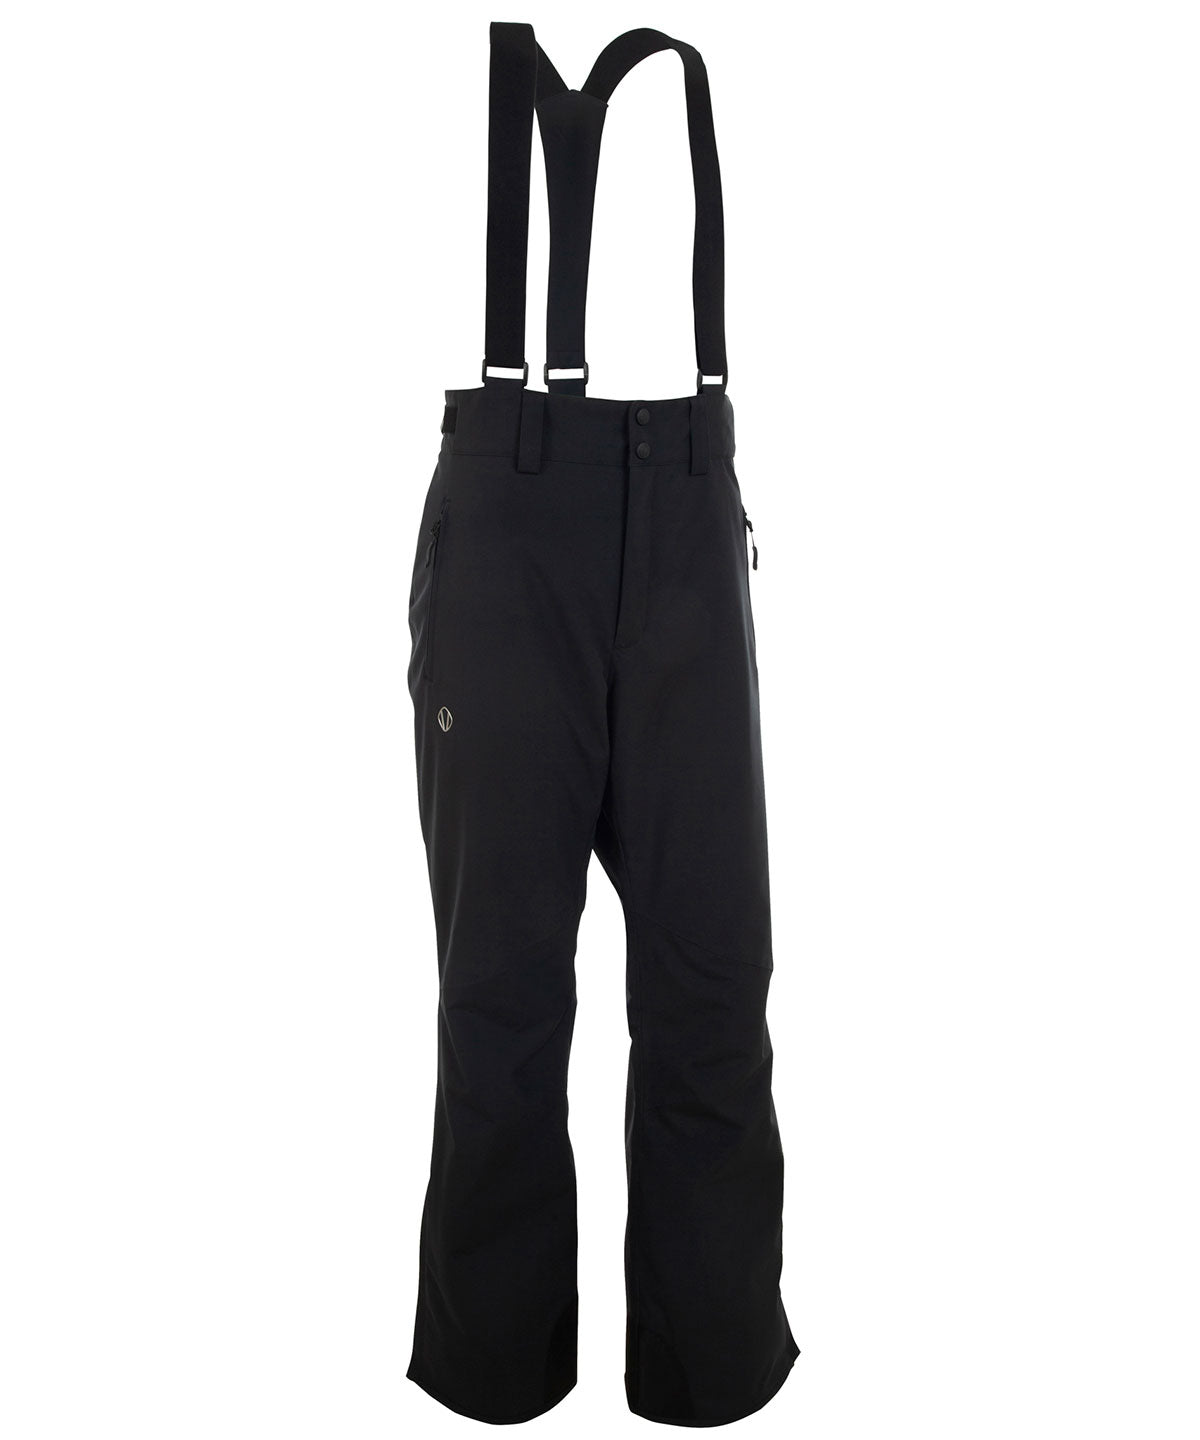 Snow Pants with Suspenders